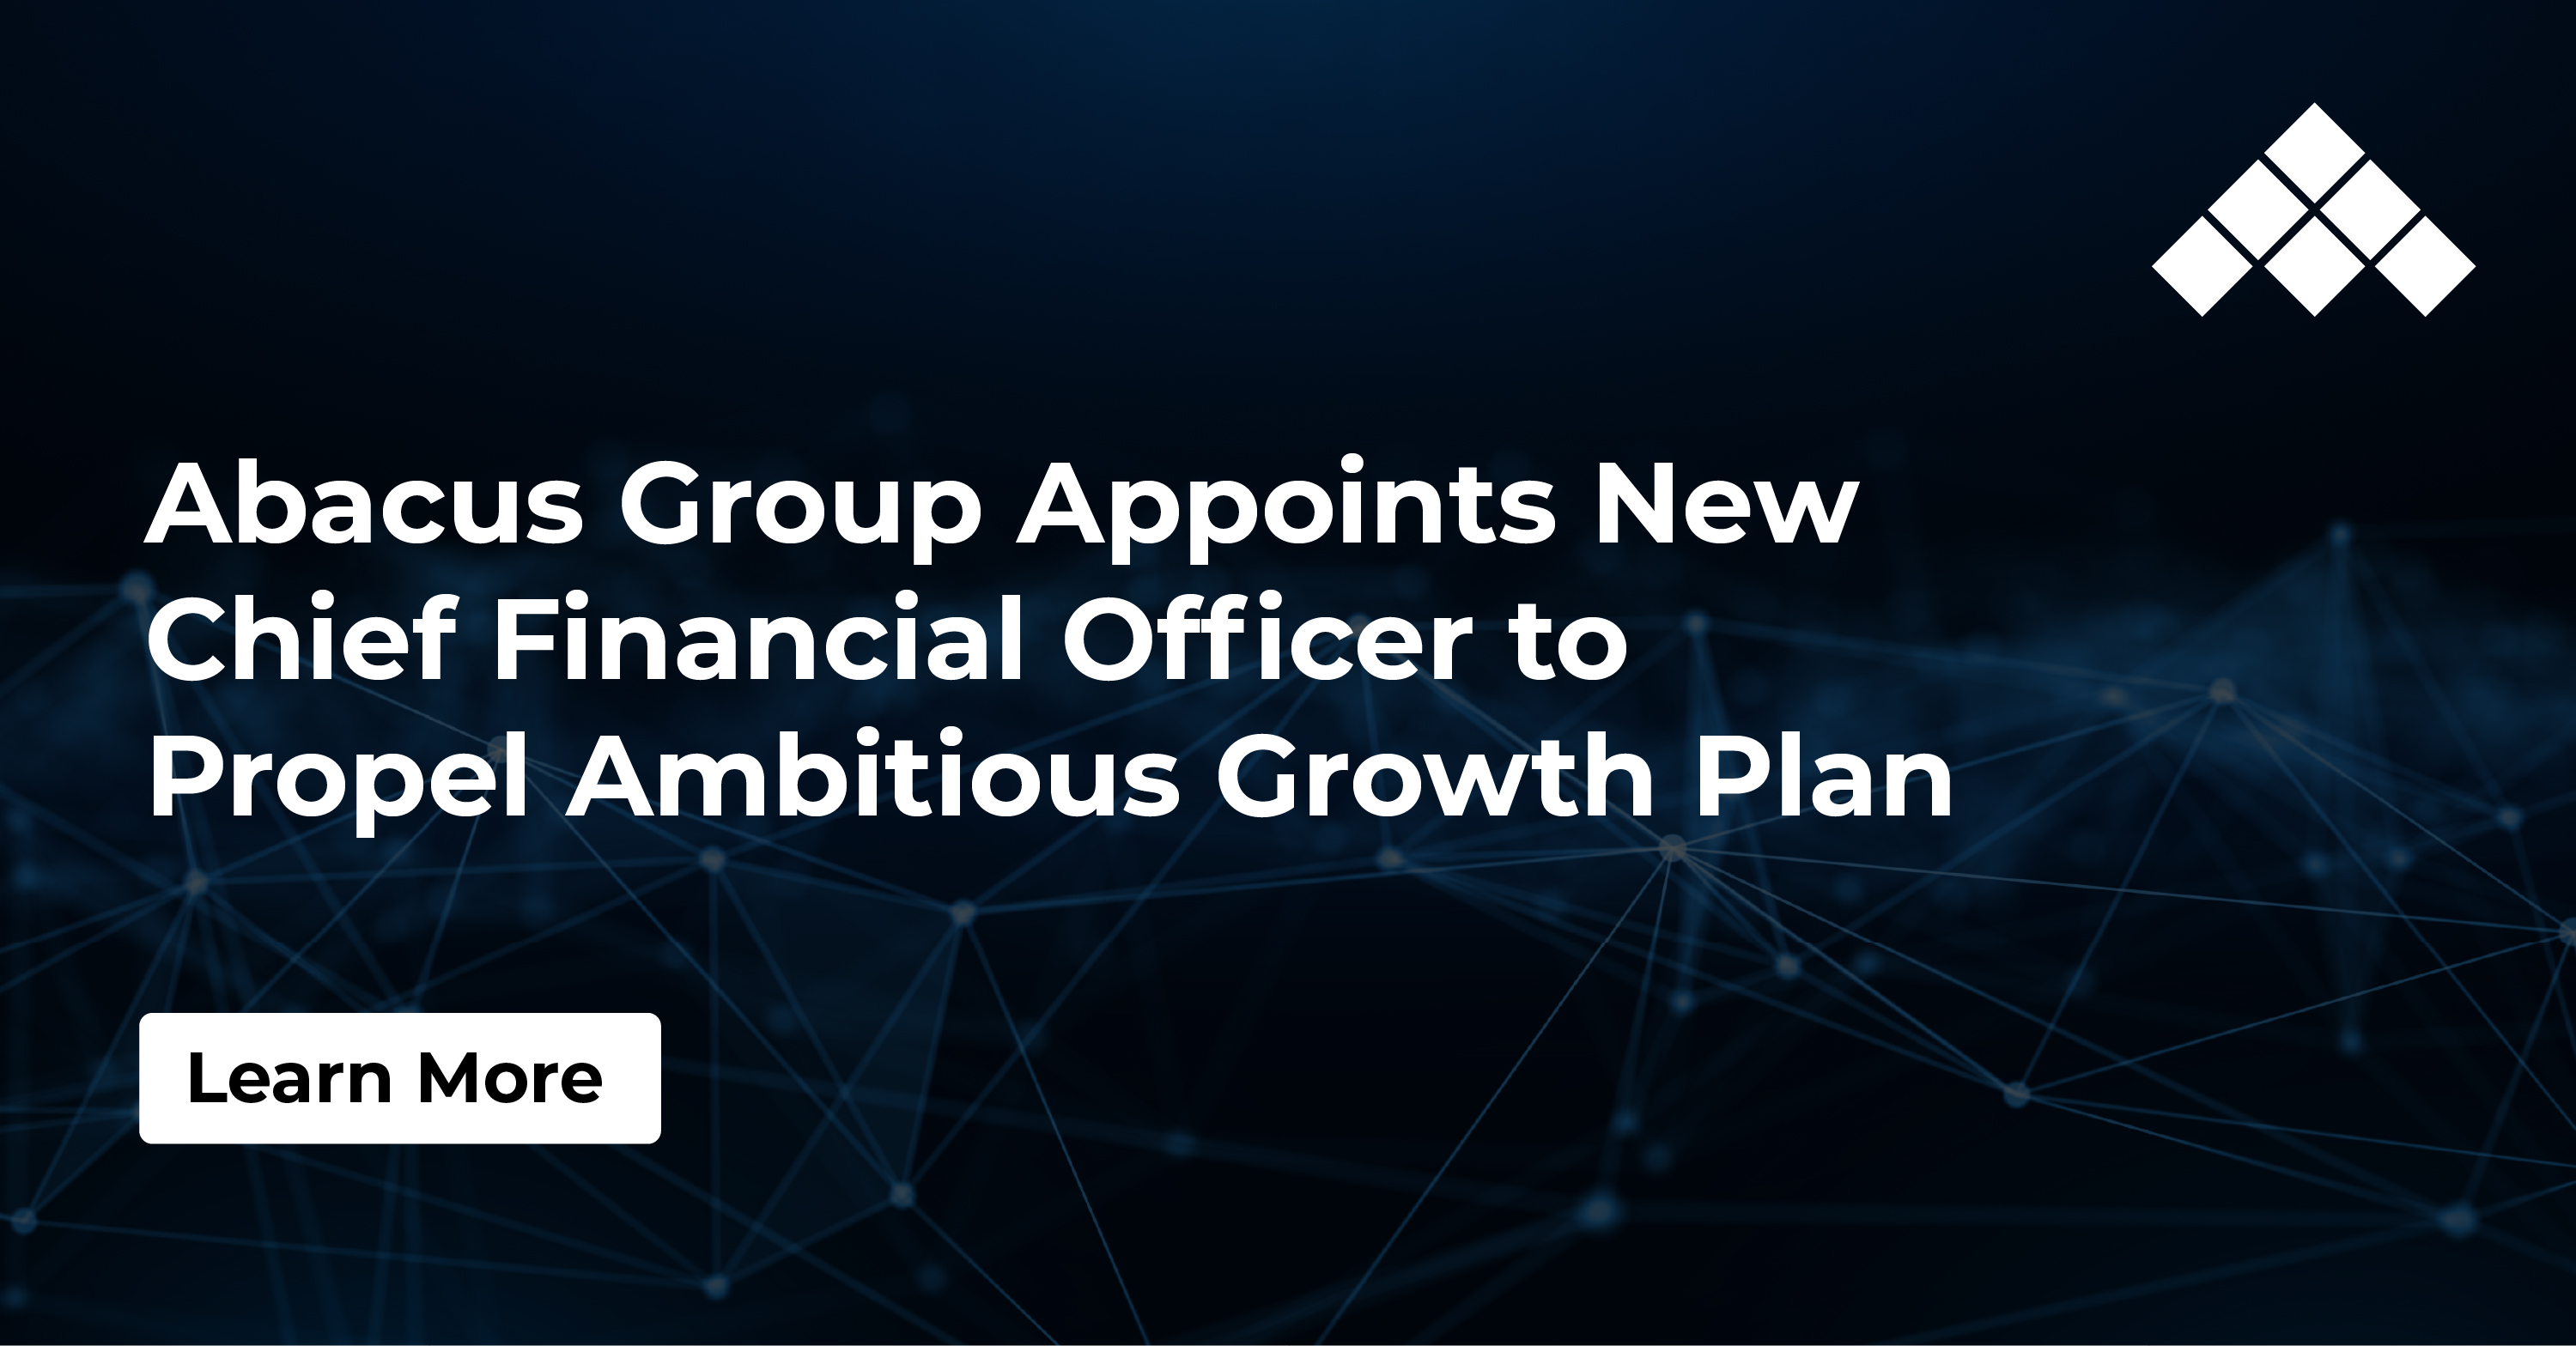 Abacus Group Appoints New Chief Financial Officer to Propel Ambitious Growth Plan